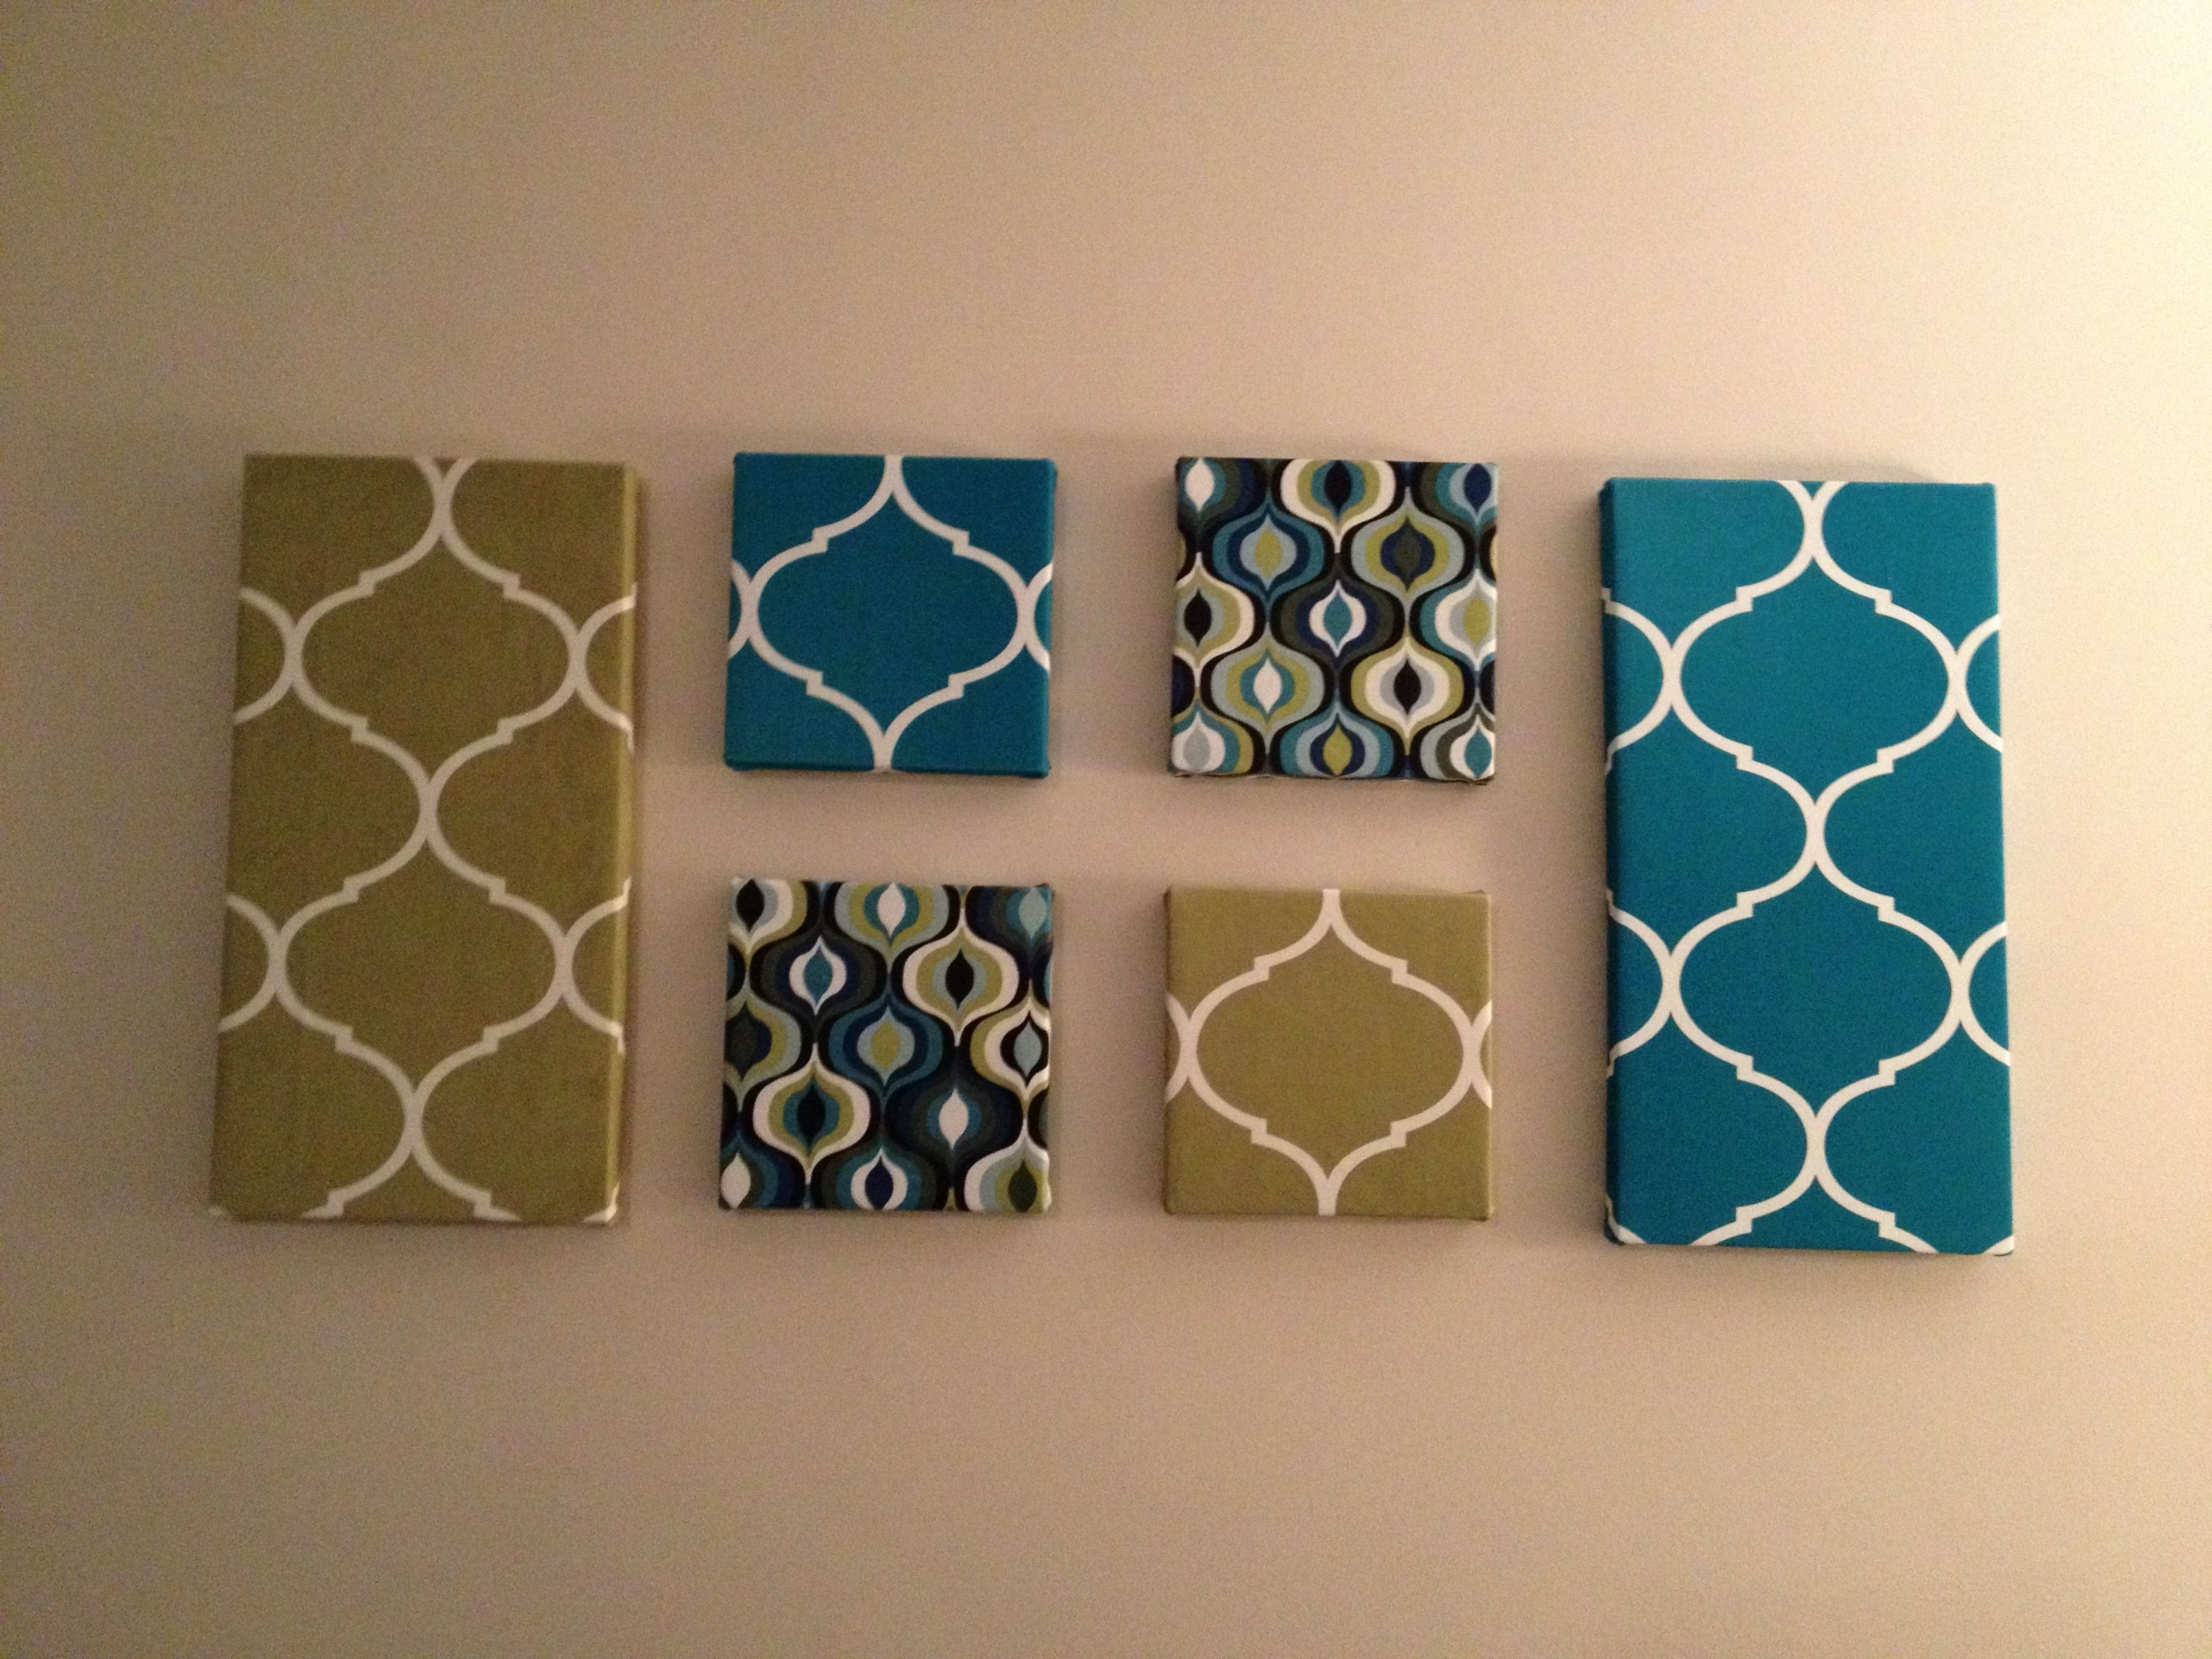 Wall Art Designs: Terrific Fabric Covered Canvas Wall Art Simple Intended For Latest Simple Fabric Wall Art (View 5 of 15)